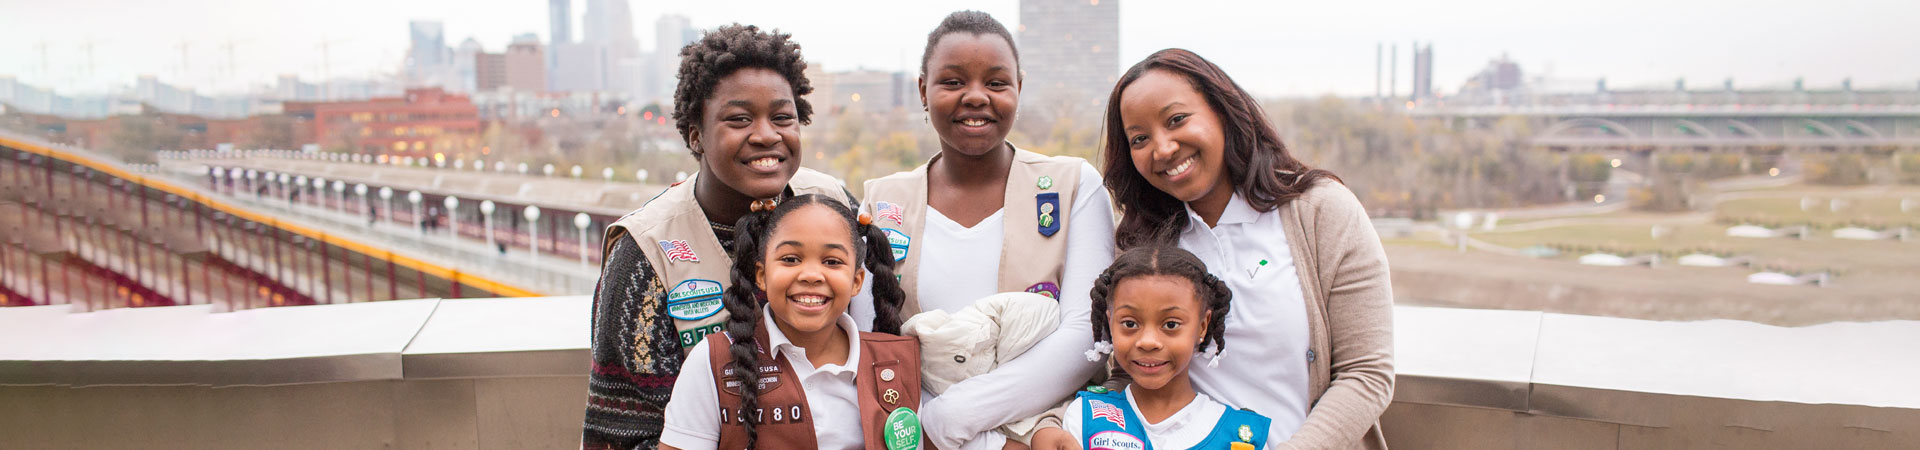  Girl Scout Family outside the Weisman Art Museum 